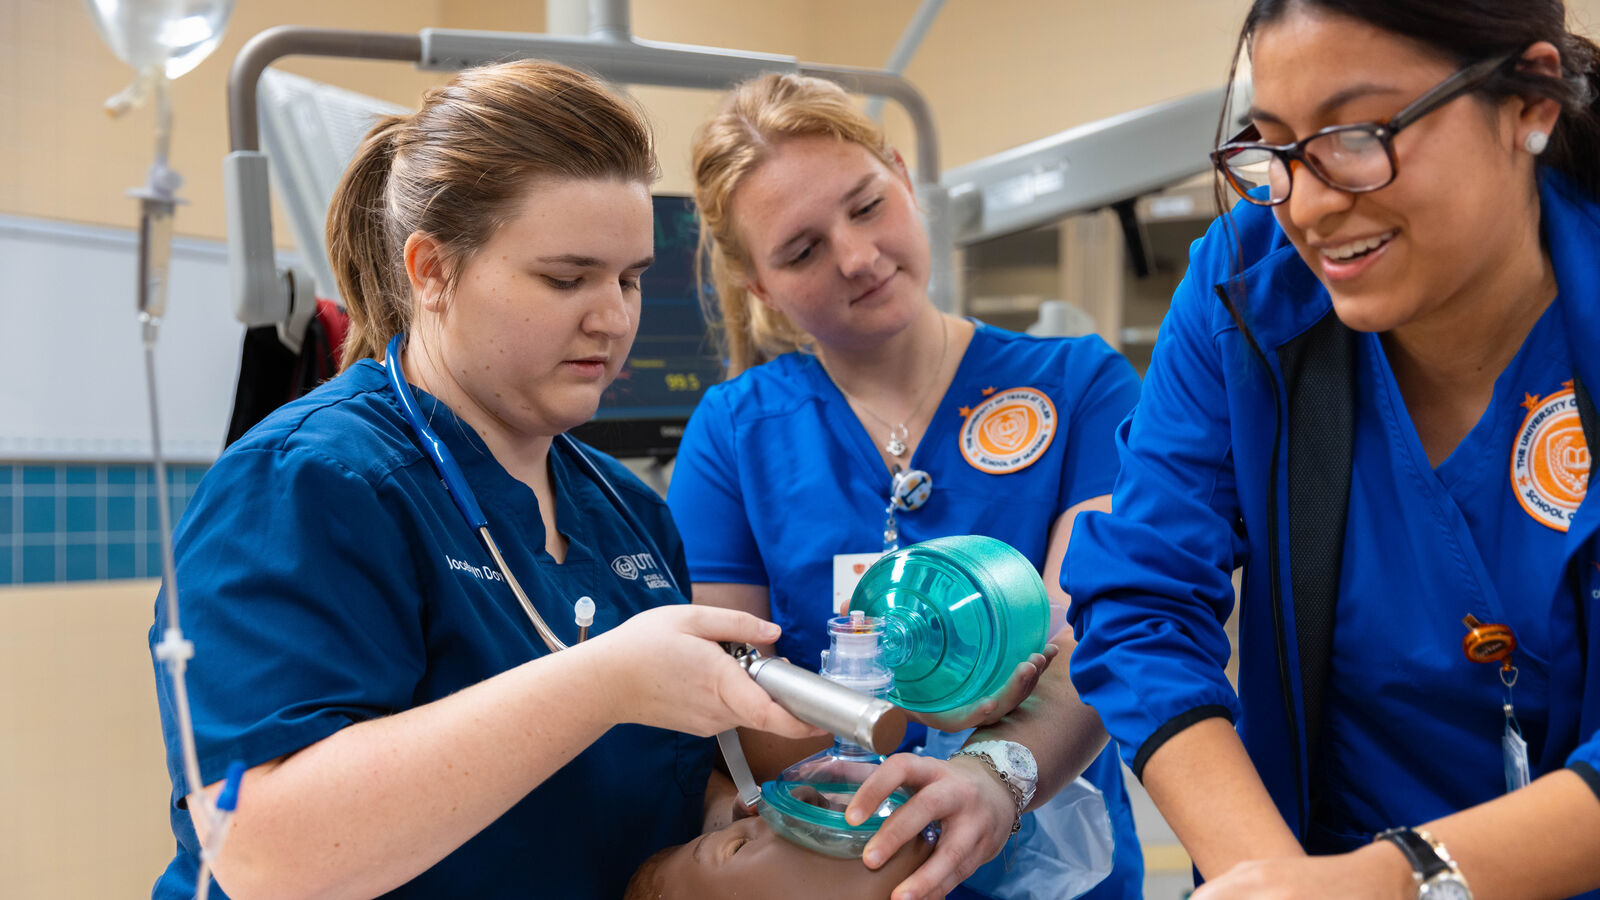 Students practice treating patients at SMILE (simulation lab on north campus) during a collaborative event between UT Tyler's School of Medicine, School of Nursing and Fisch College of Pharmacy.